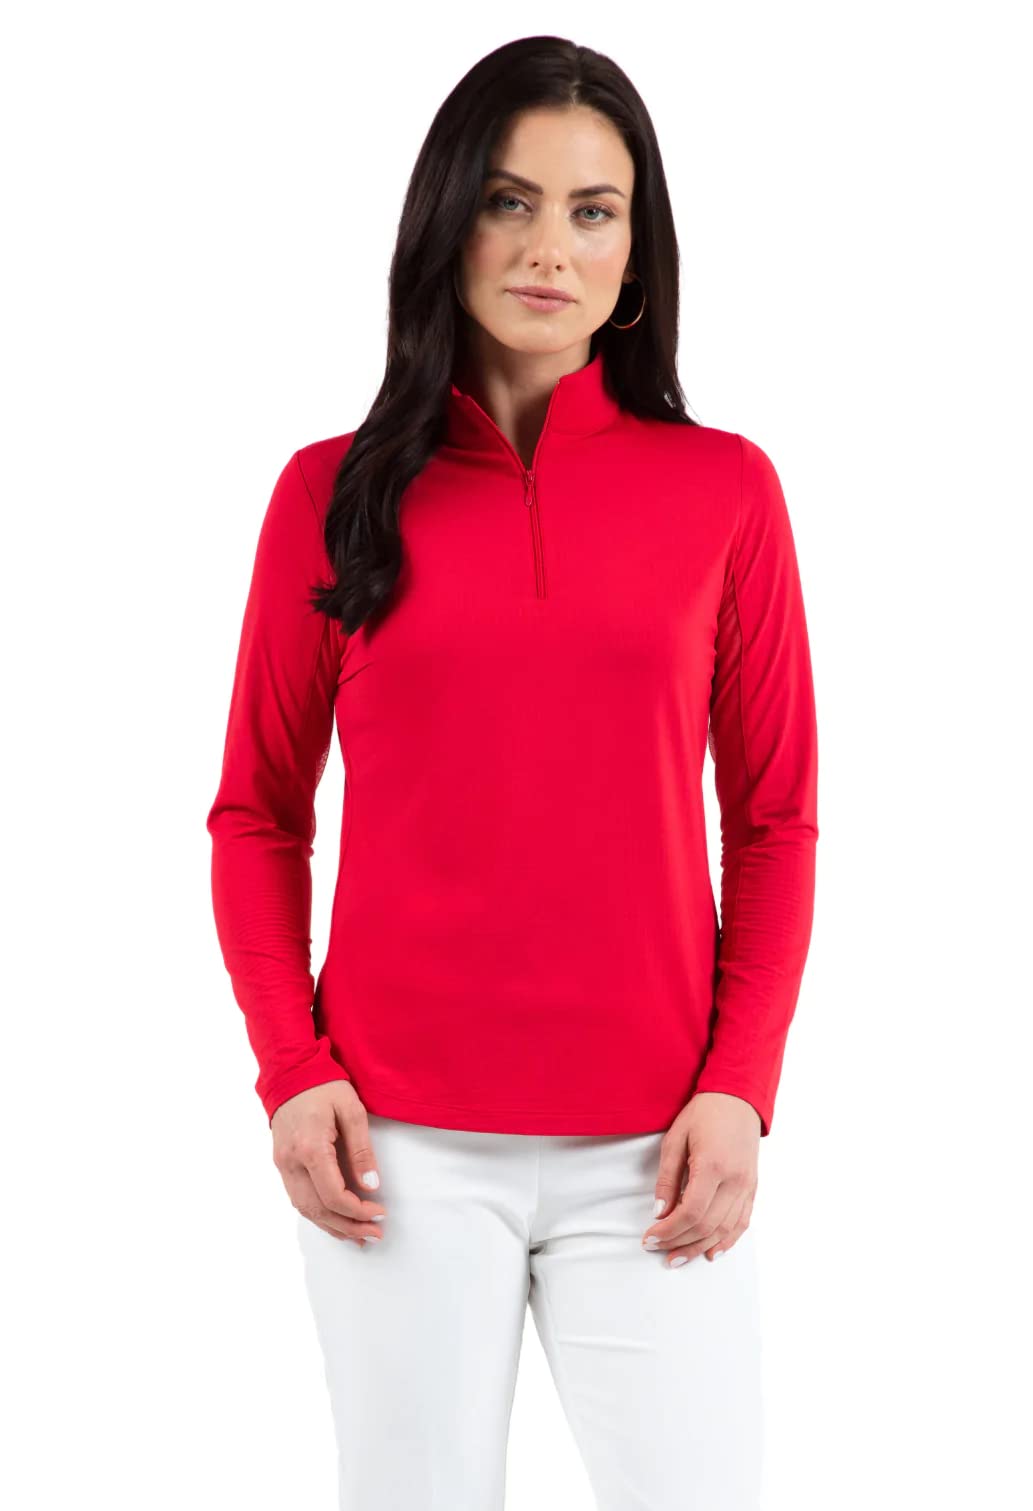 IBKUL Athleisure Wear Sun Protective UPF 50+ Icefil Cooling Tech Long Sleeve Mock Neck Top with Under Arm Mesh 80000 Red Solid L